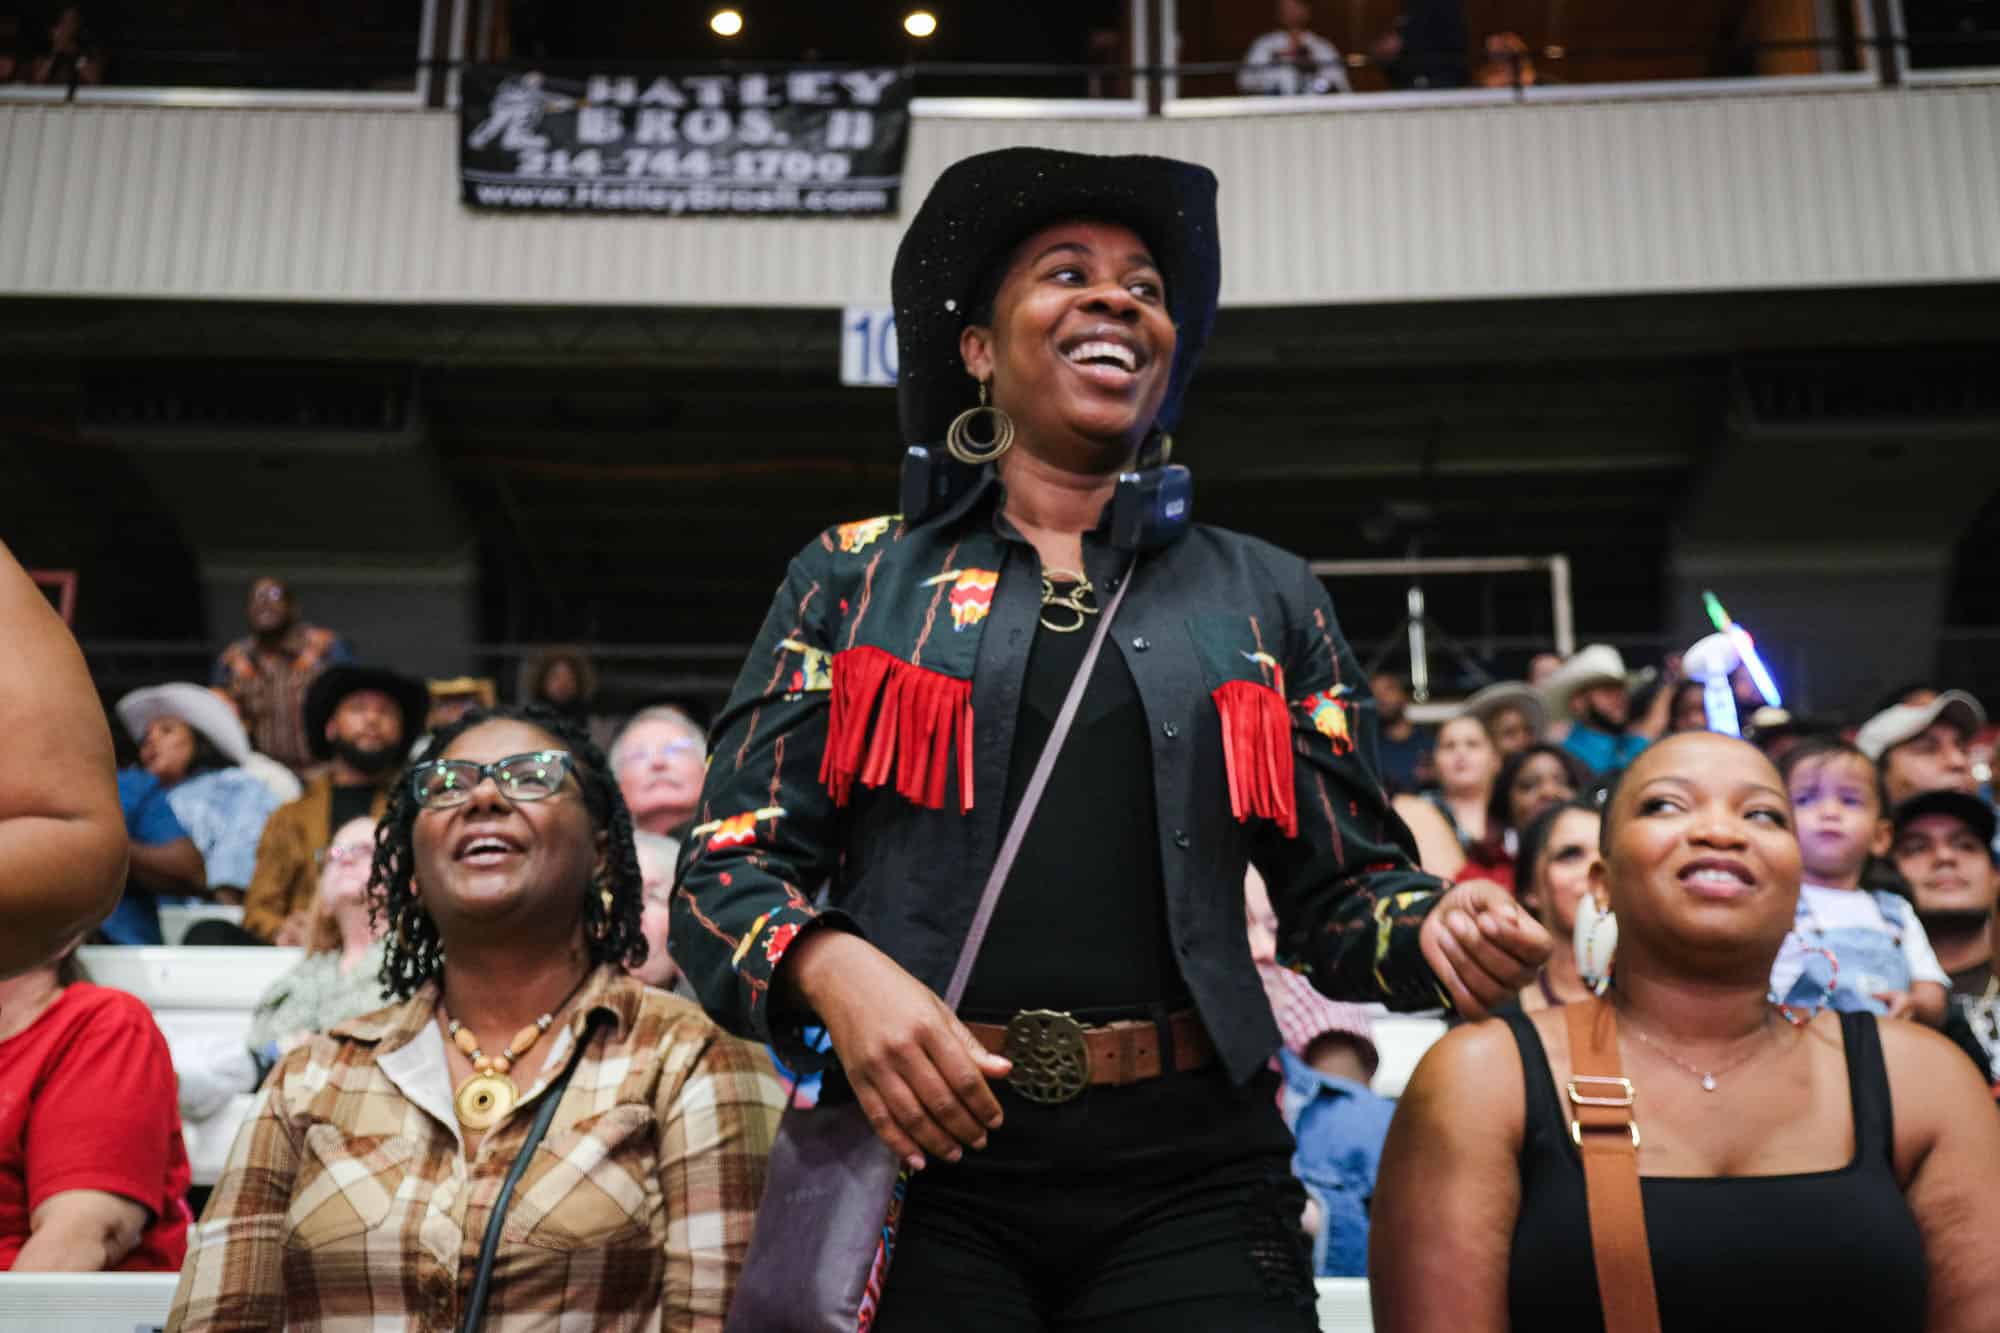 A woman in a black hat and embroidered jacket standing and smiling at an event, with other attendees seated around her.